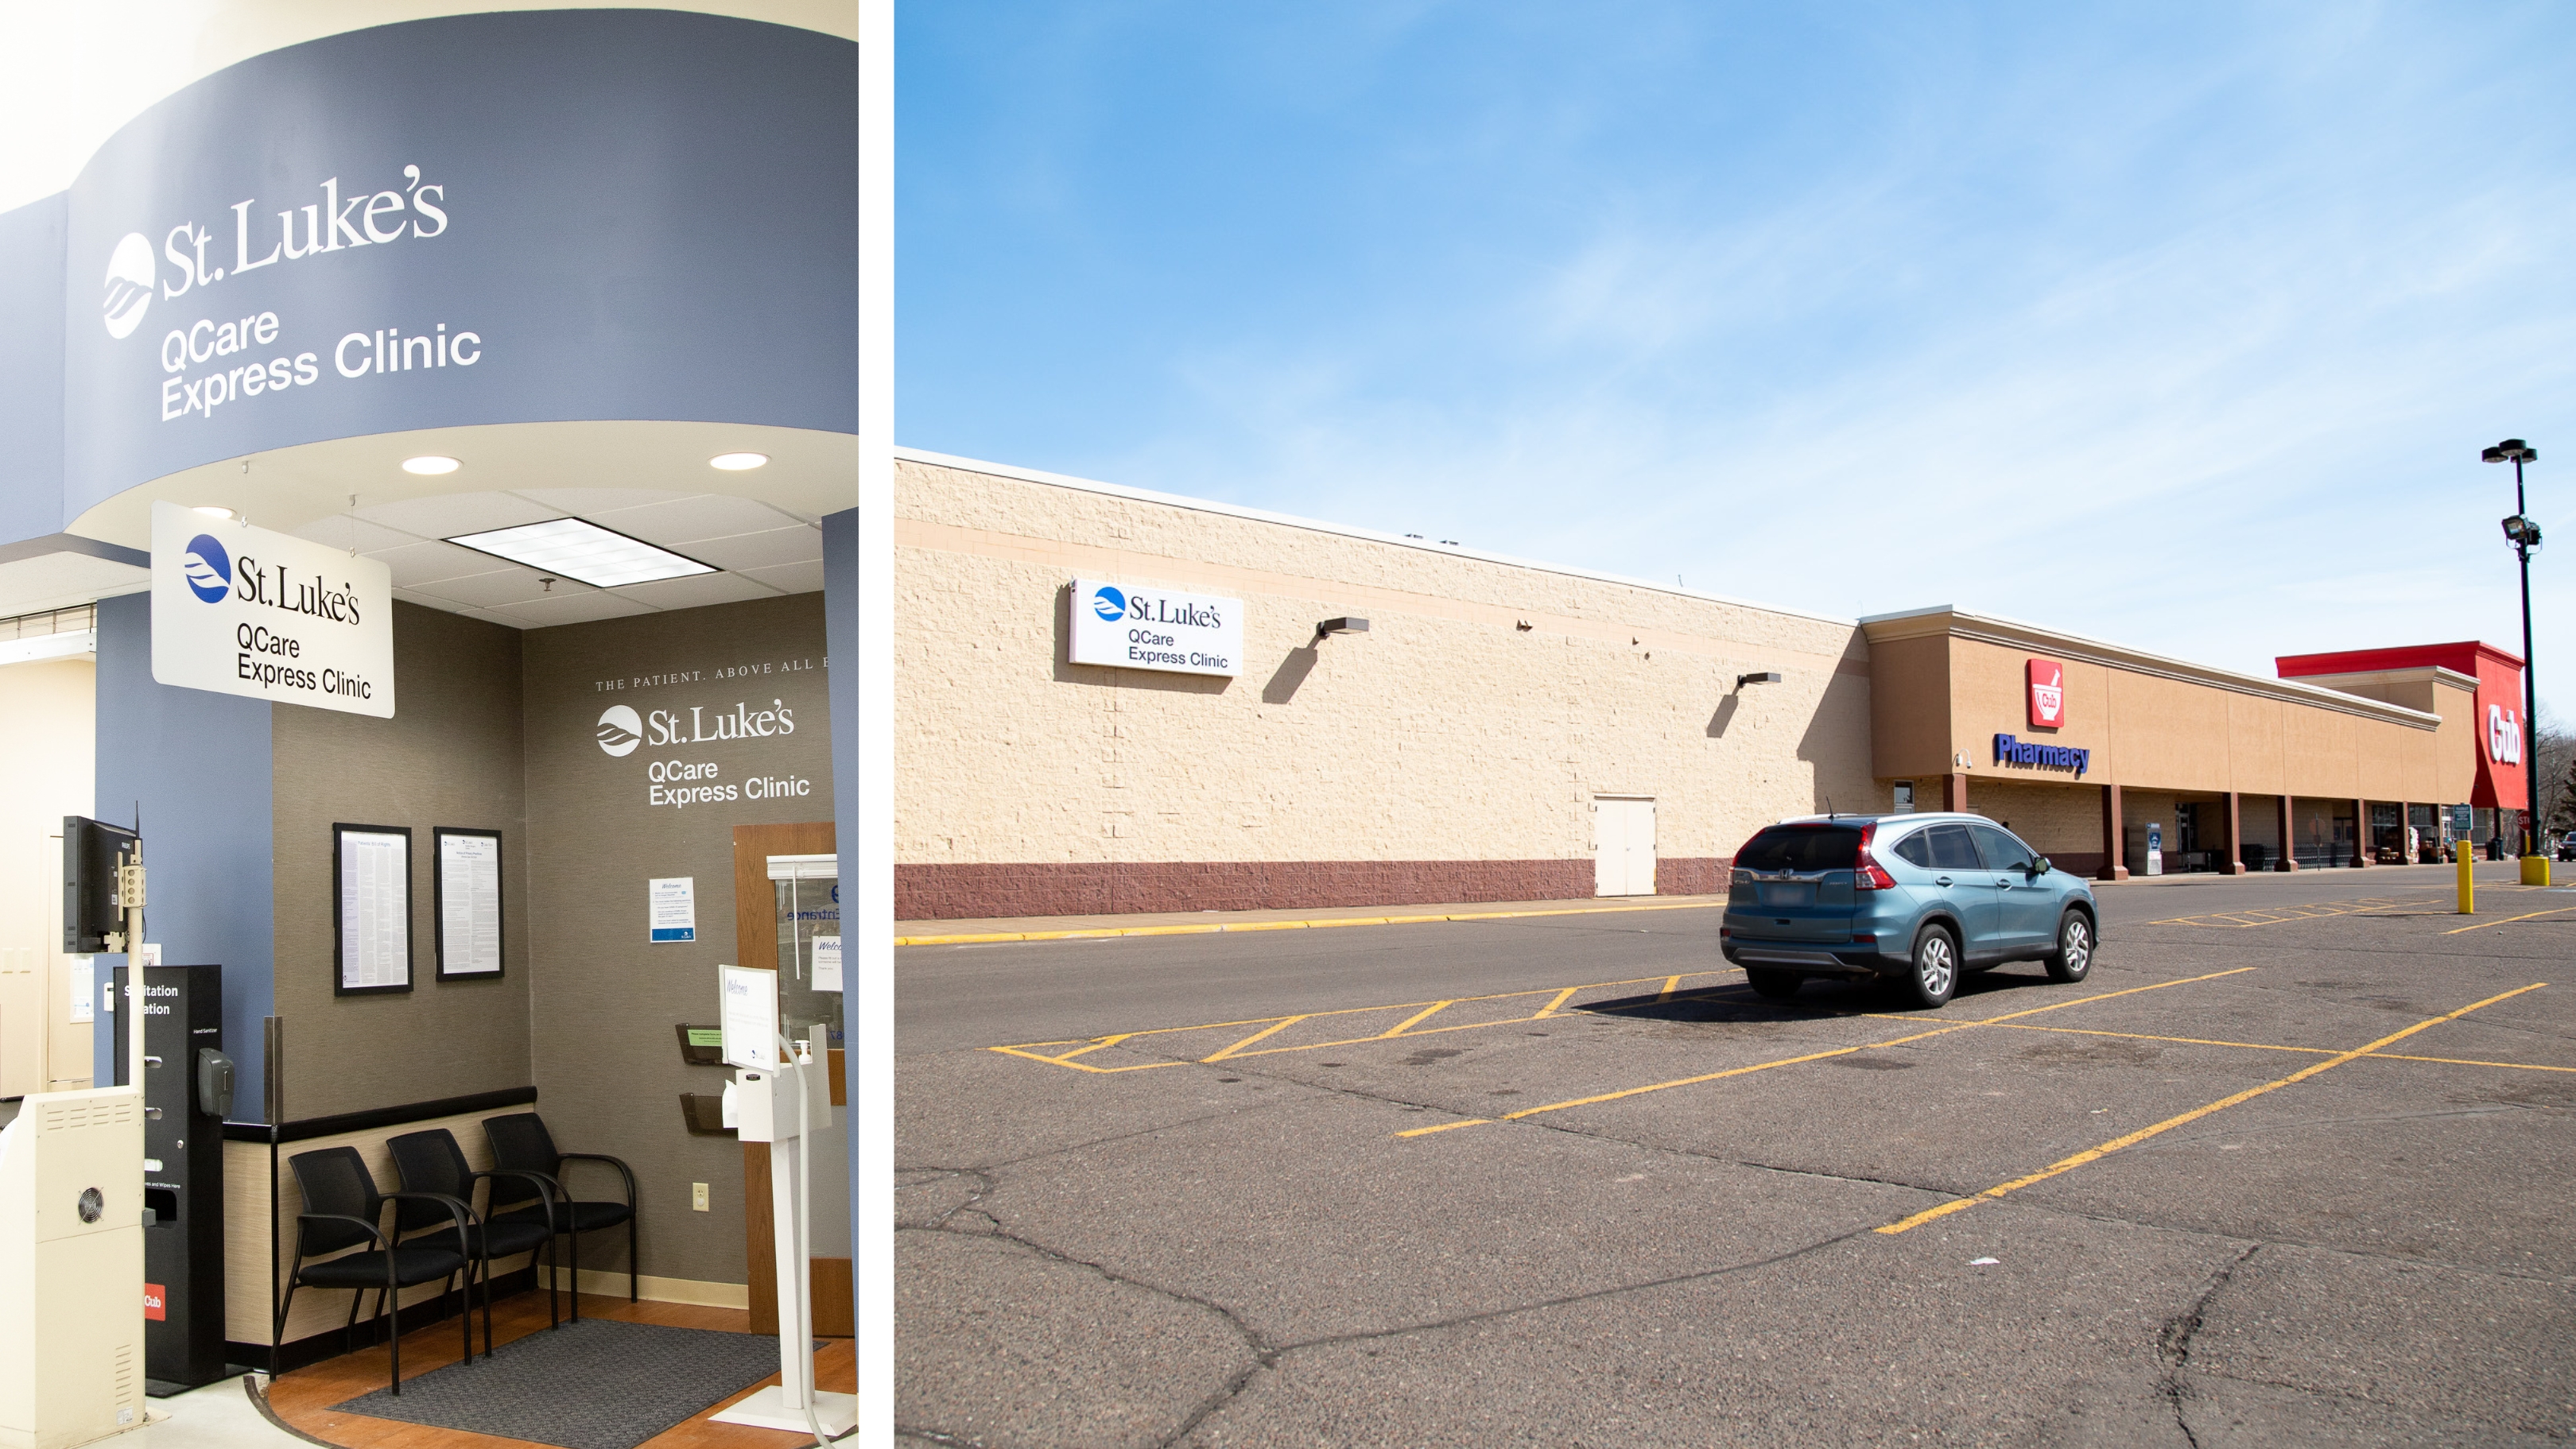 St. Luke's QCare Express Clinic - Duluth, MN 55811 - (218)249-4987 | ShowMeLocal.com